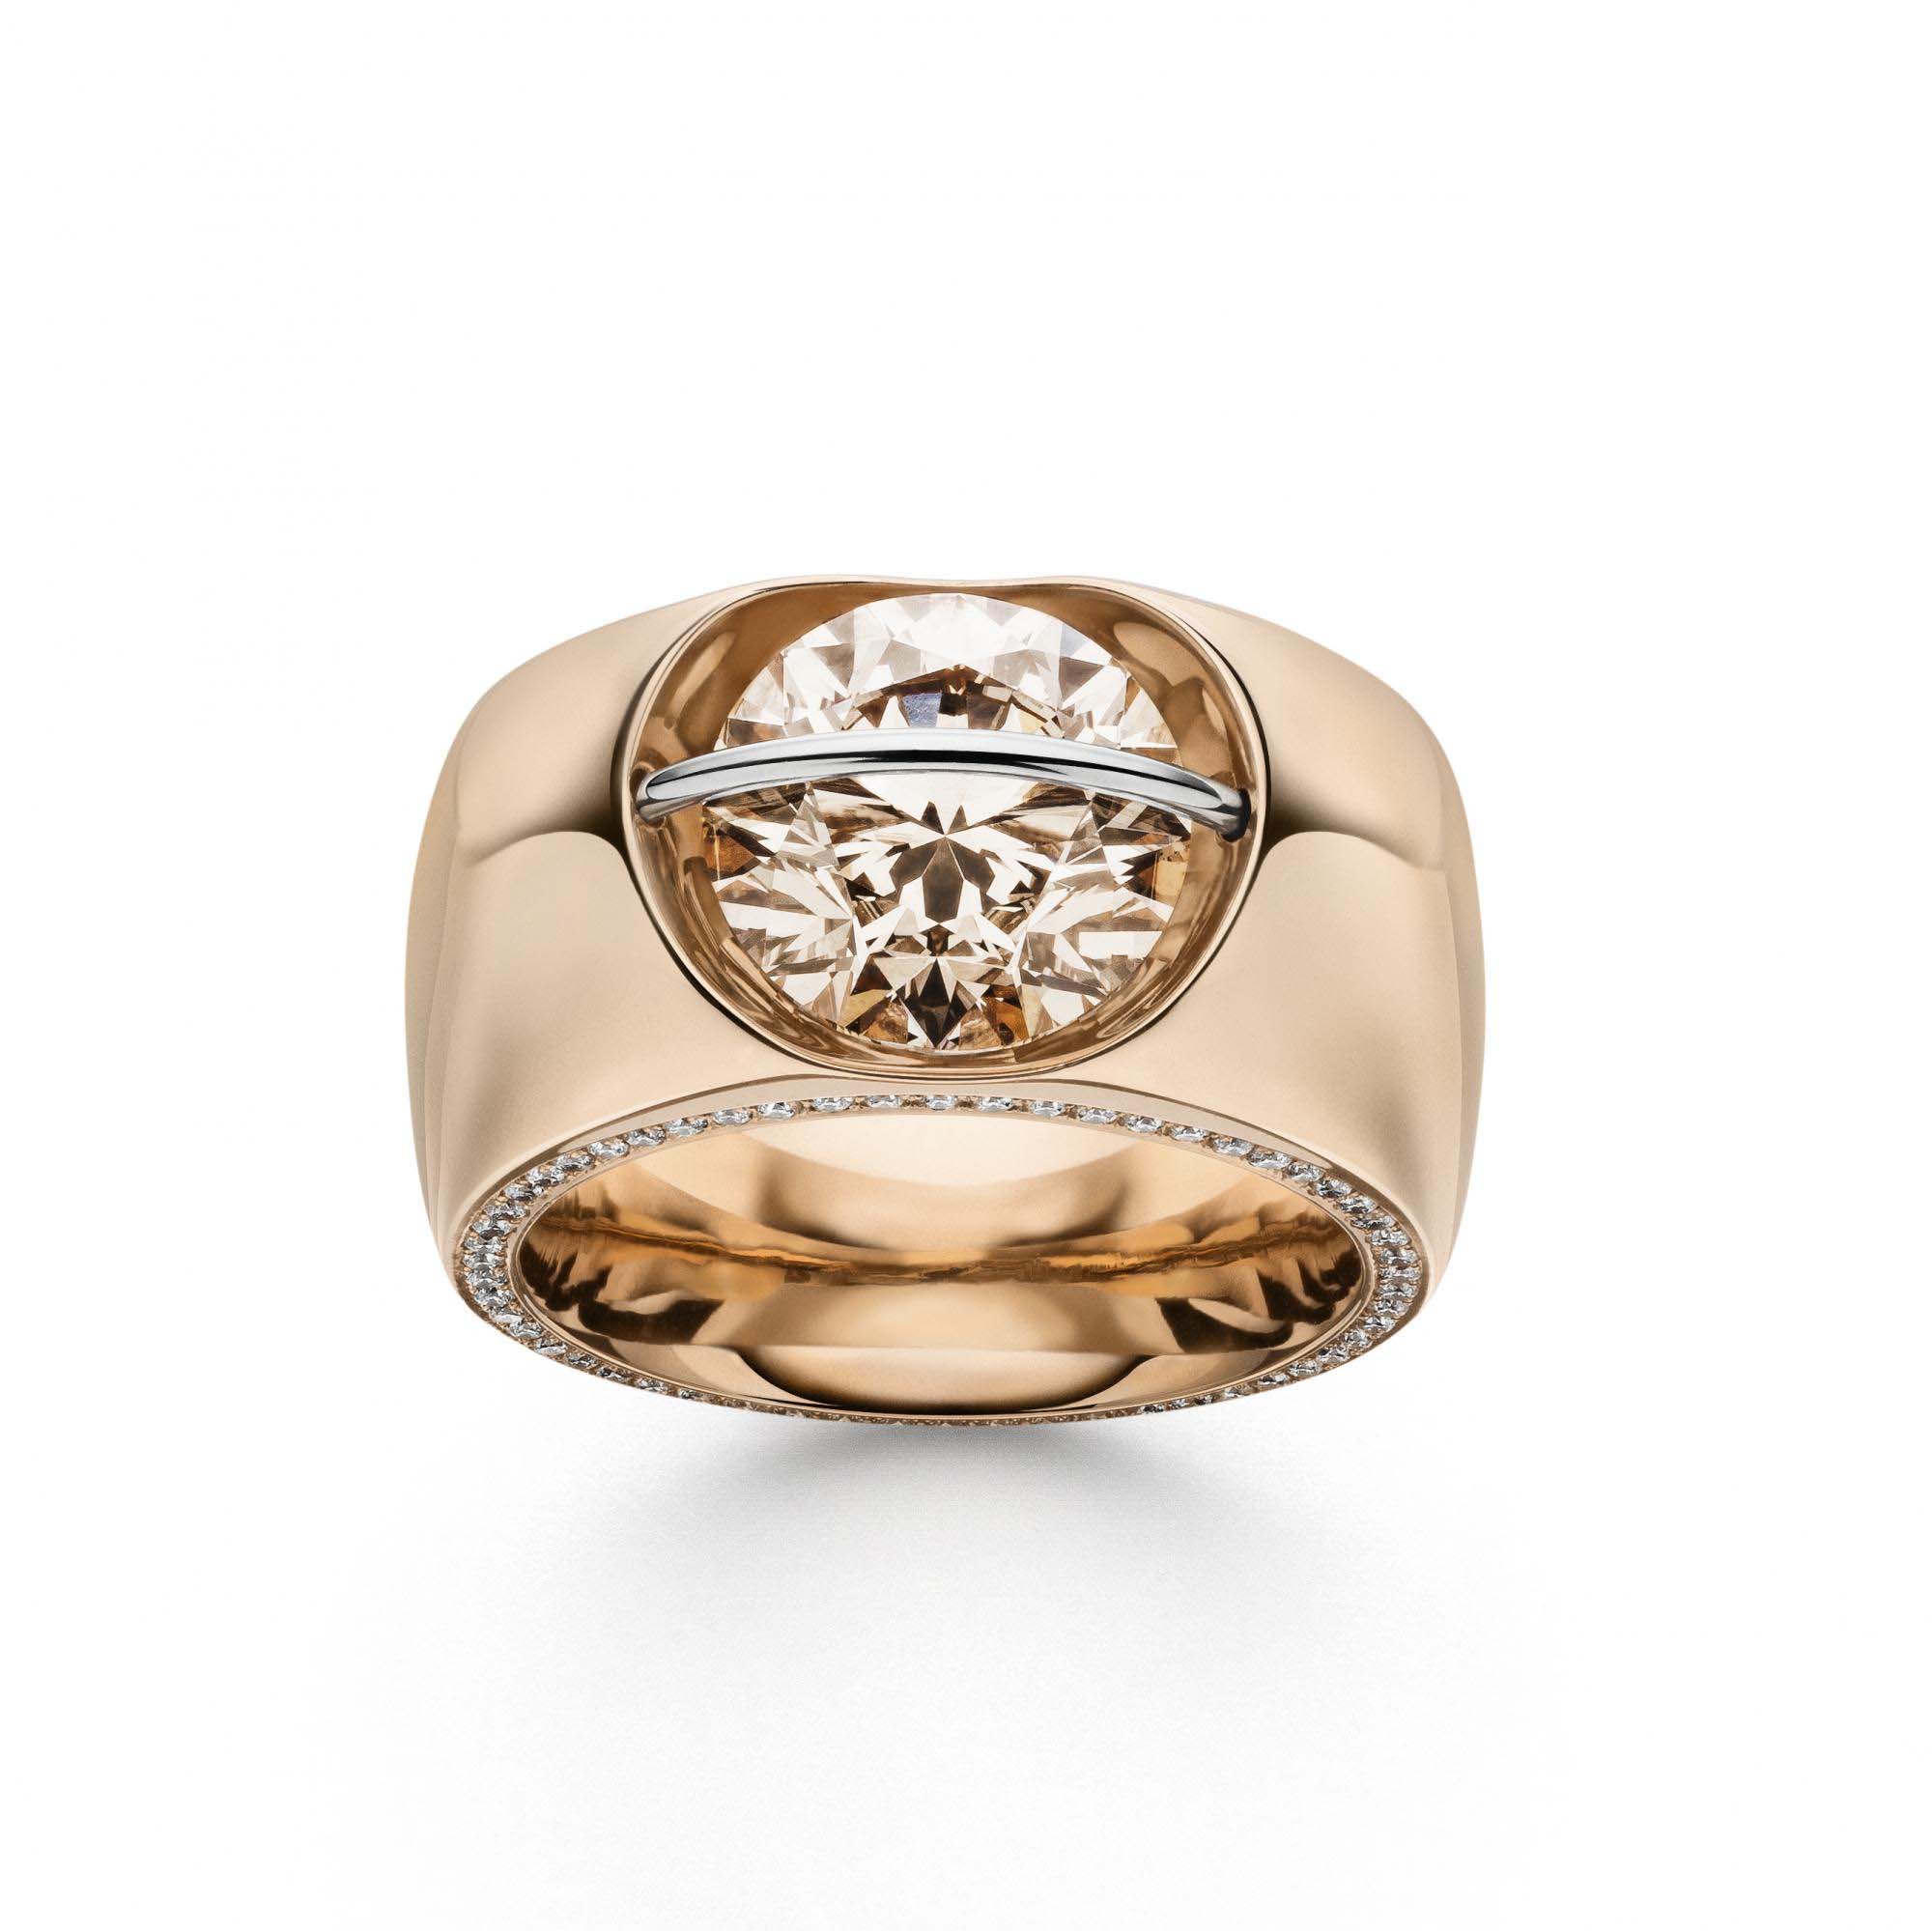 Wholesale customized OEM/ODM Jewelry ring with rhodium and rose gold CZ jewelry wholesale